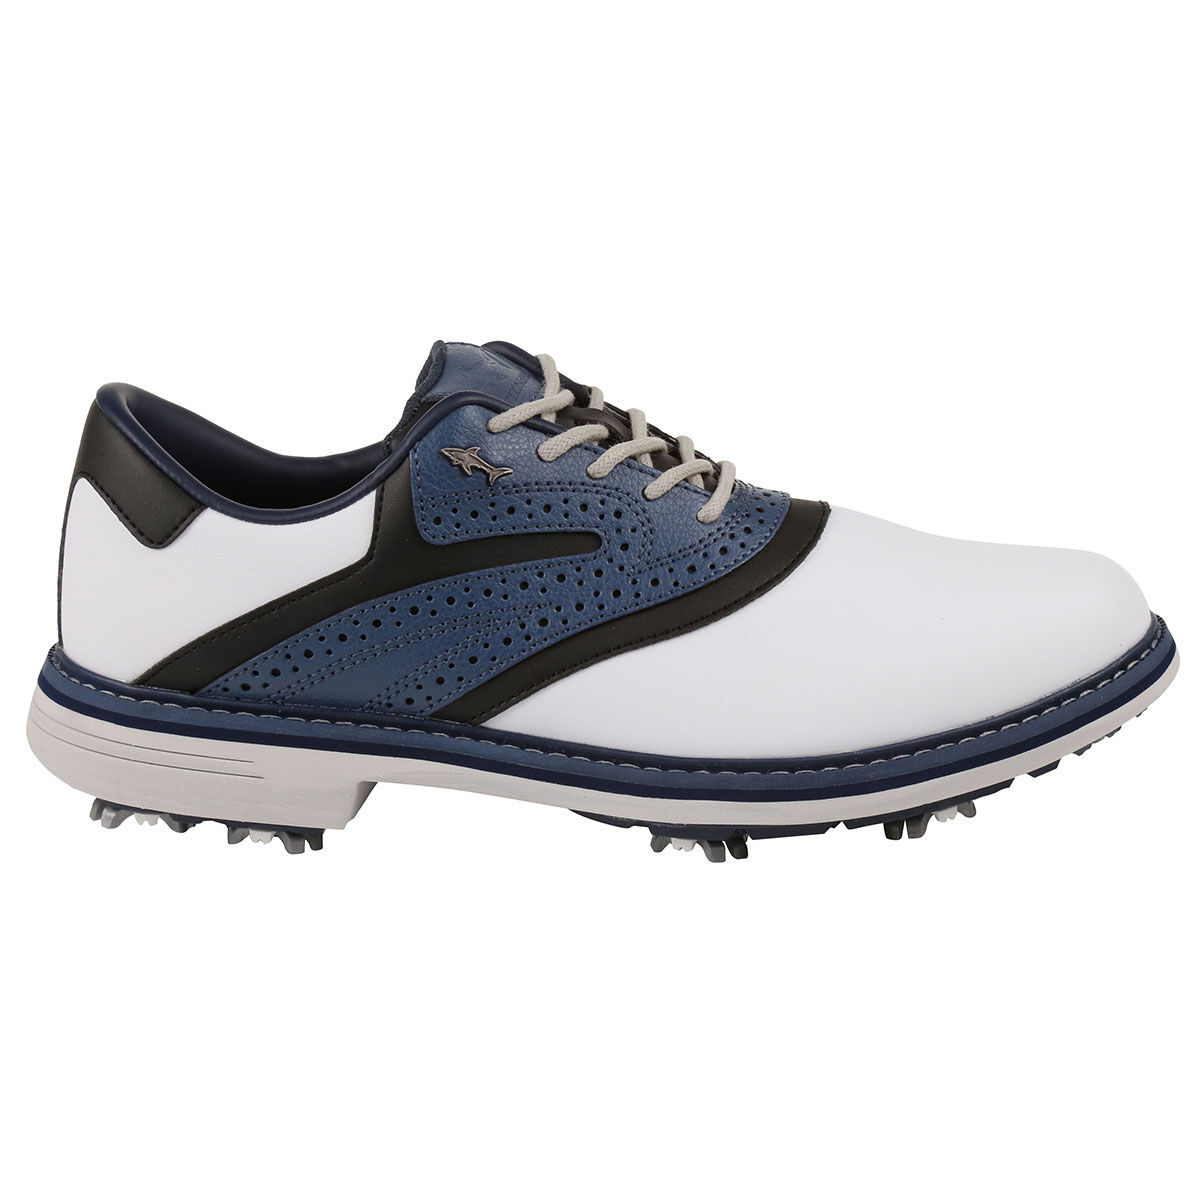 Greg Norman Golf Shoes, Men’s Isa Tour Waterproof Spiked, Mens, White/navy, 7 | American Golf